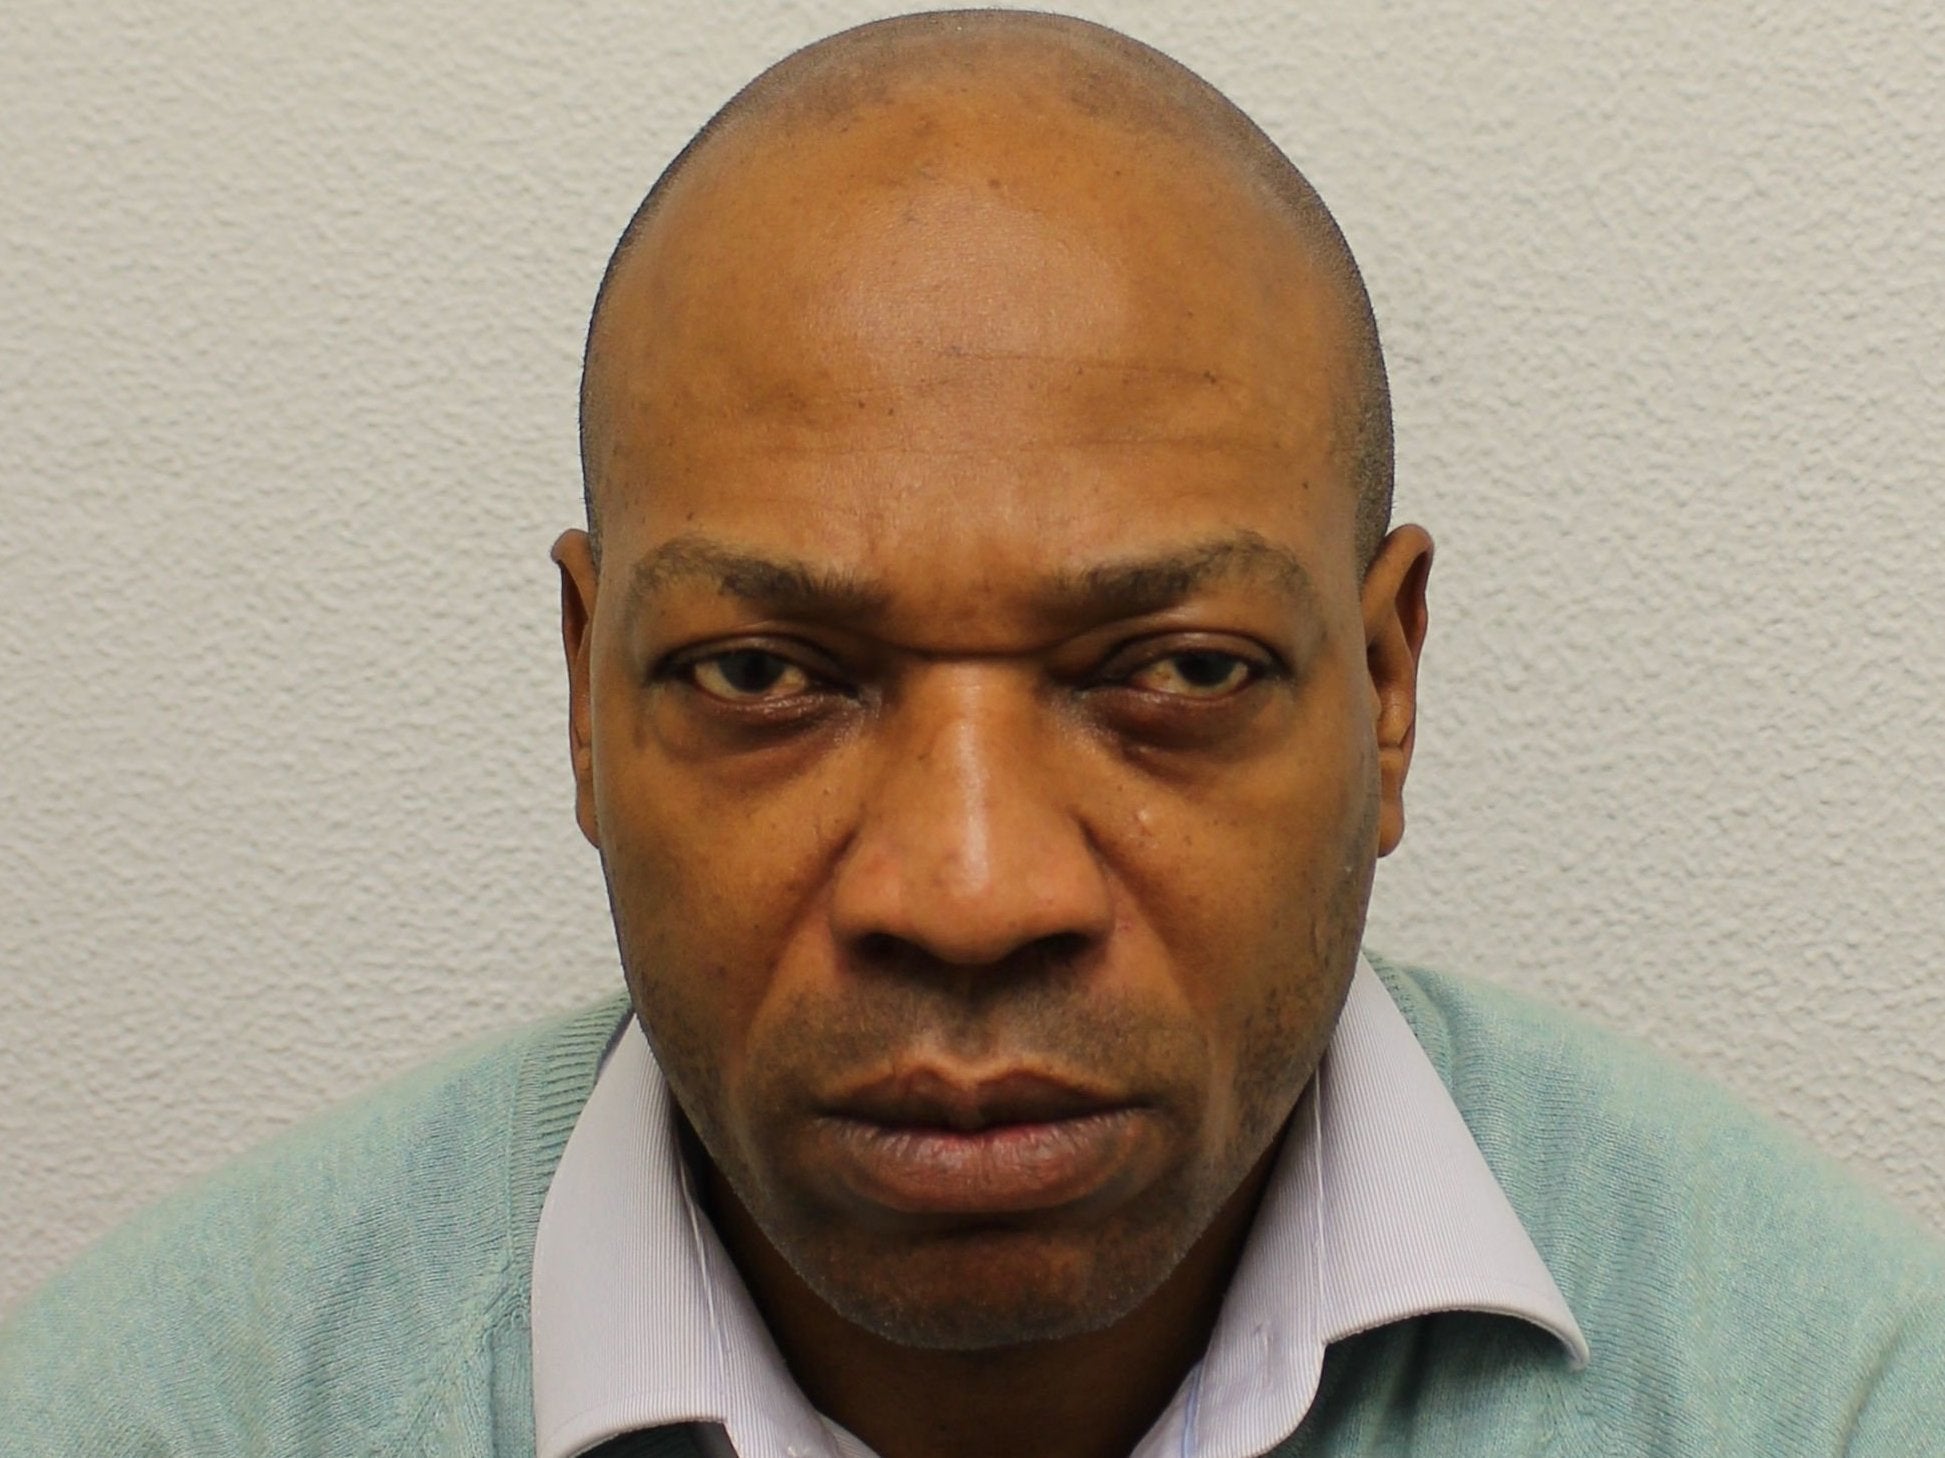 Abolaji Onafuye, 54, posed as a victim of the Grenfell Tower fire and has been convicted of a £33,000 fraud